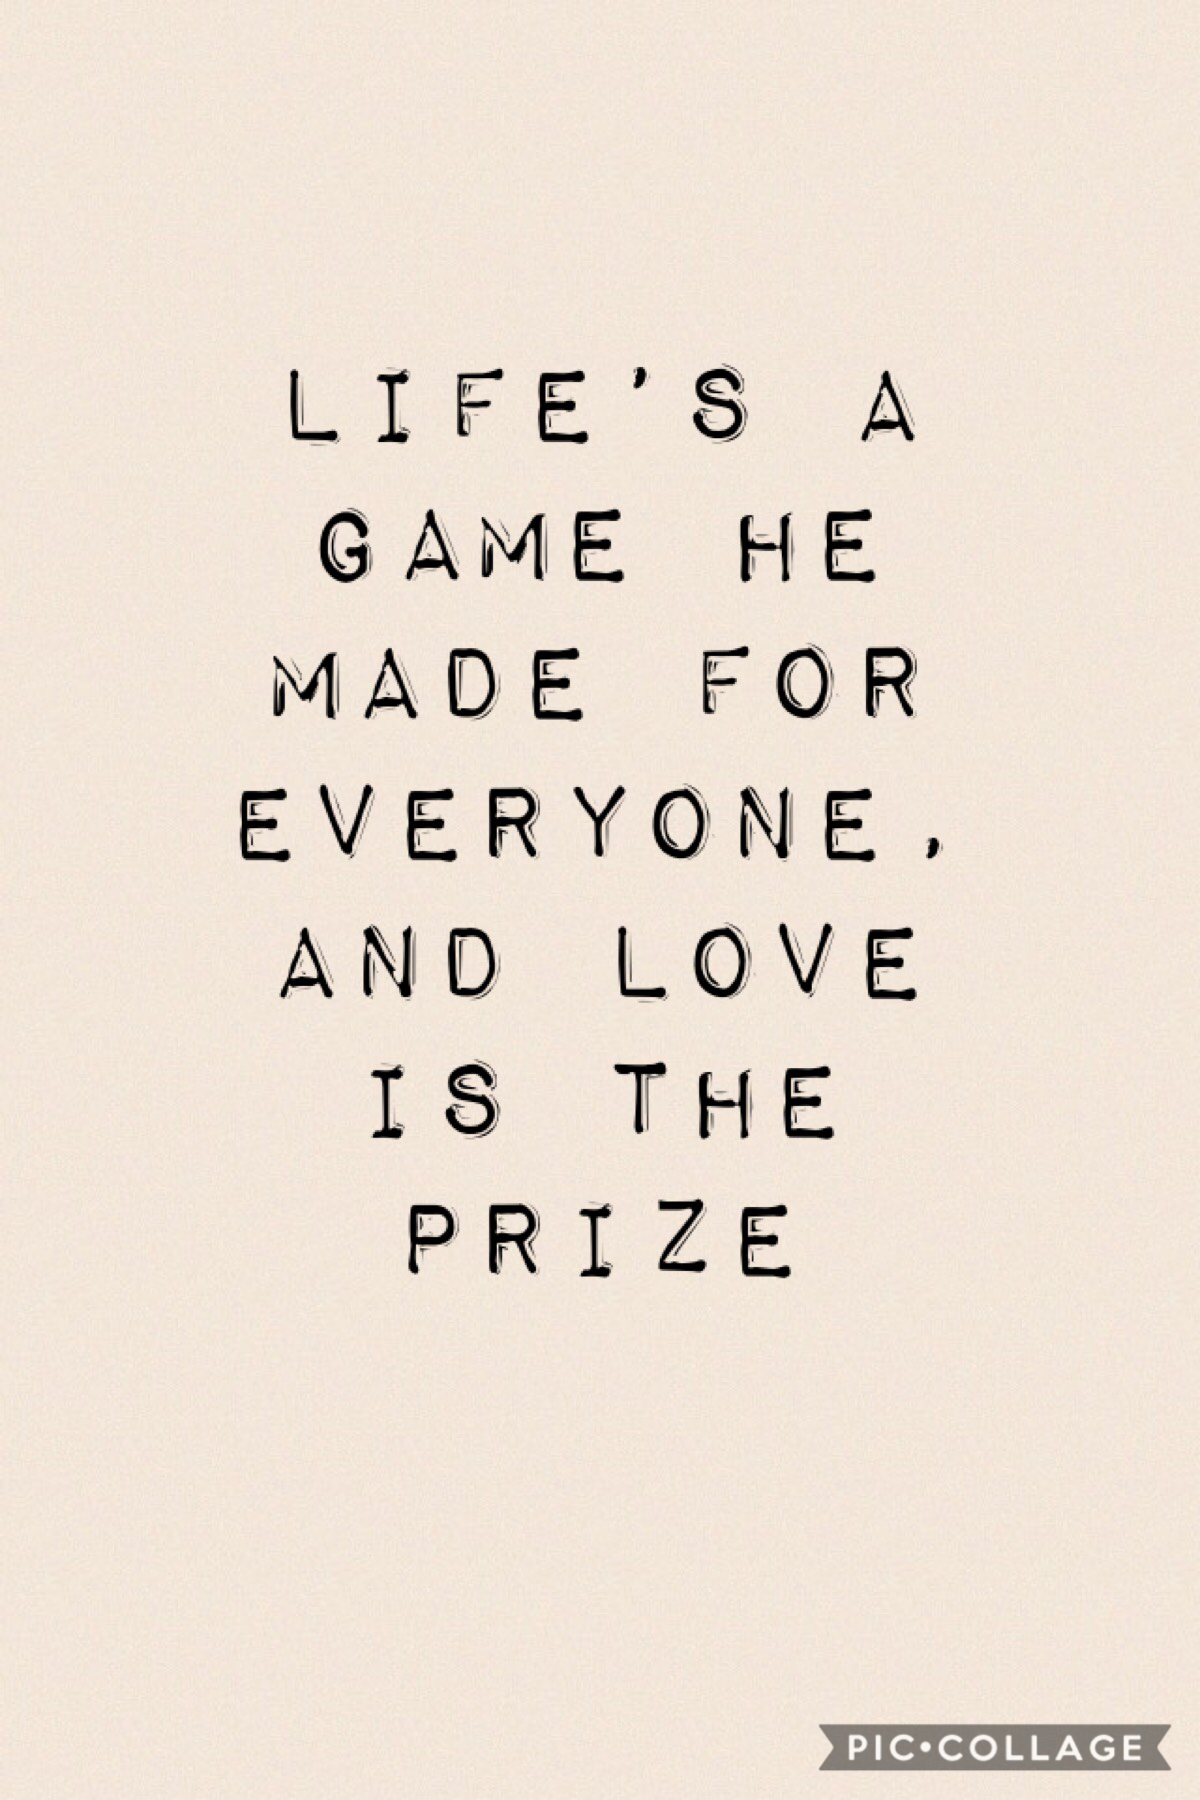 let’s play the game, and revive the prize. ❤️❤️